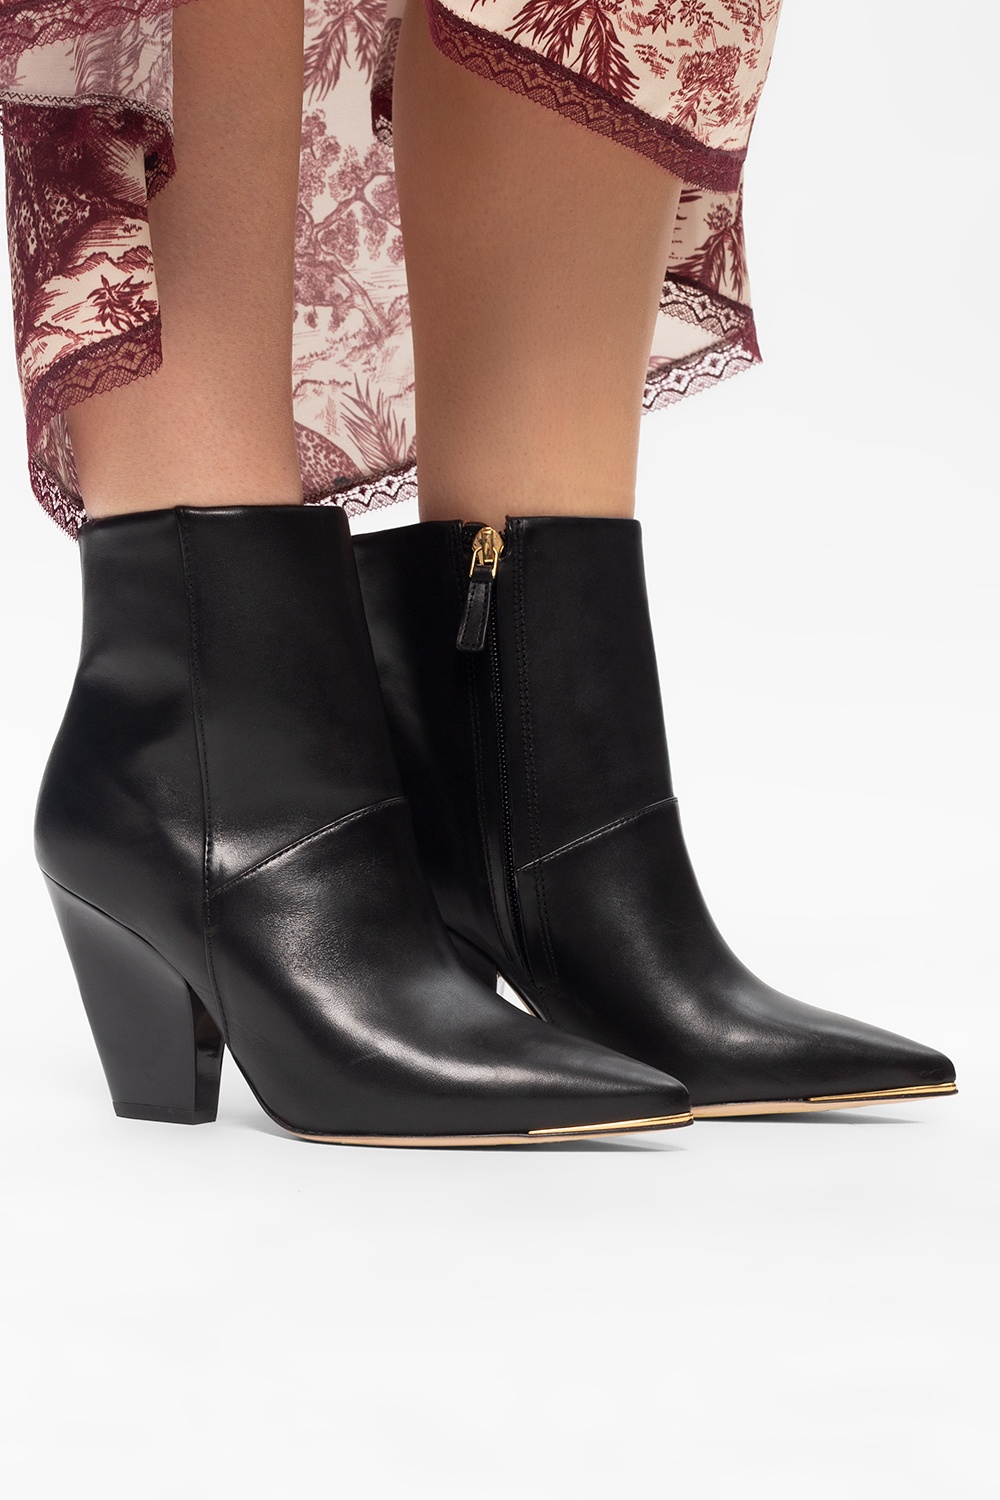 Tory Burch 'Lila' leather ankle boots | Women's Shoes | Vitkac